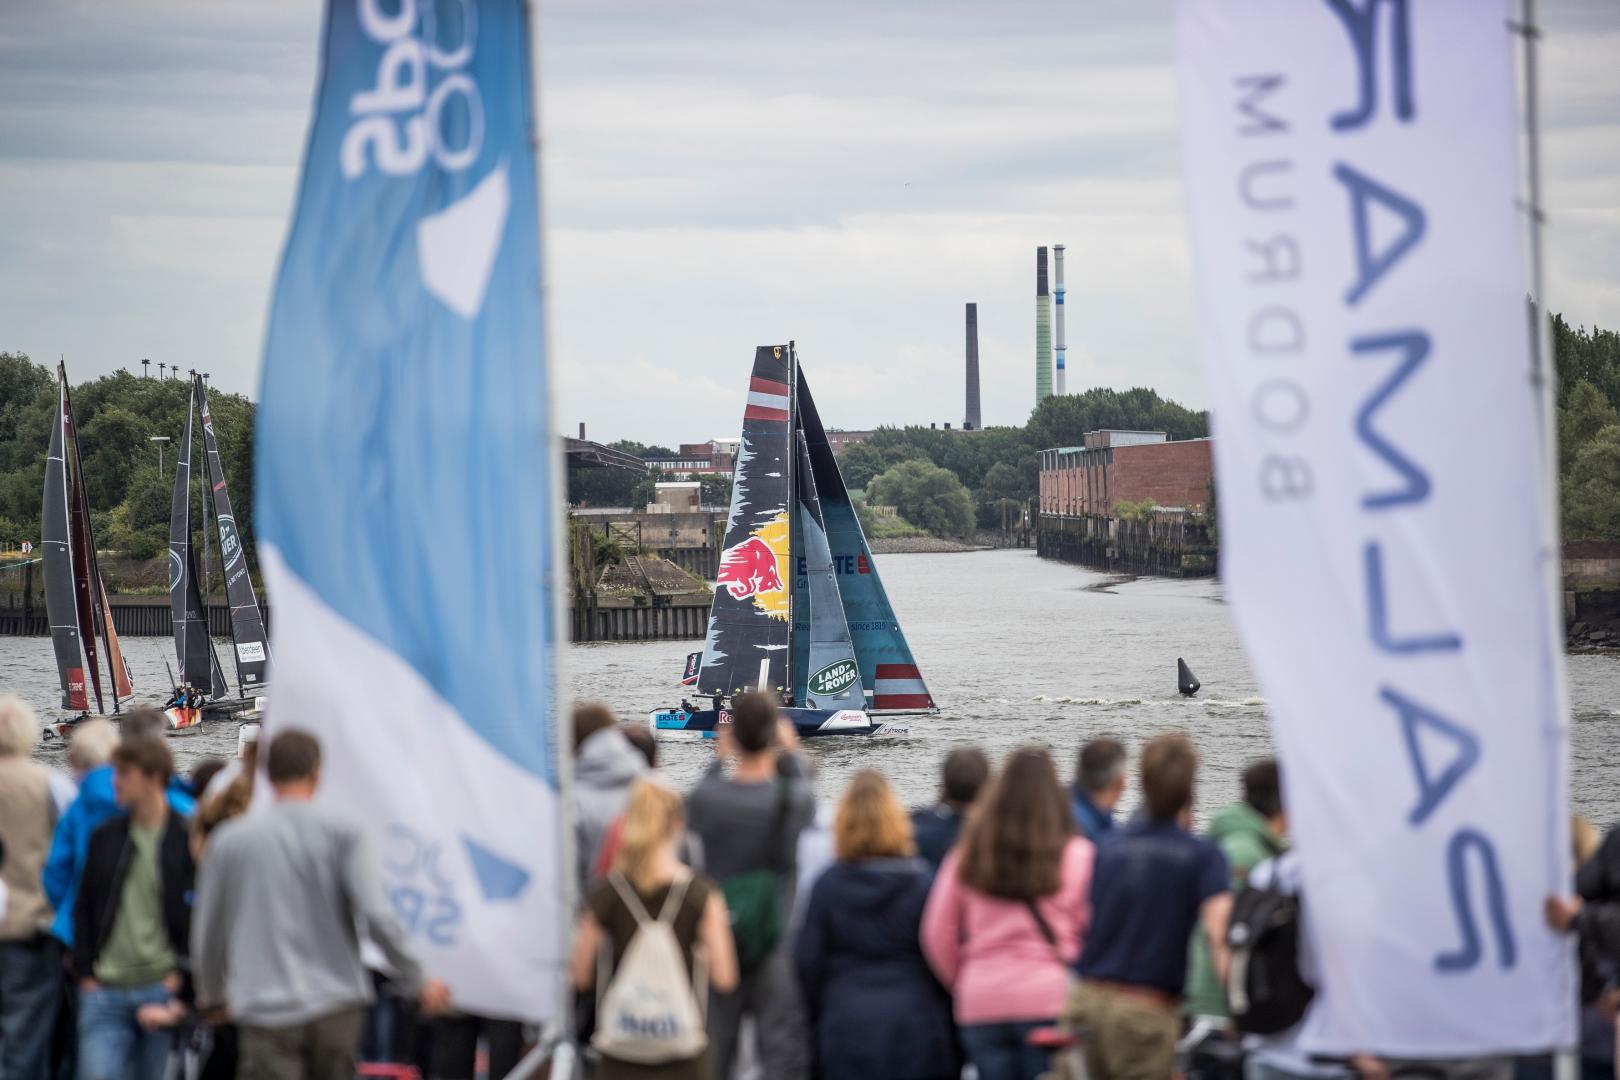 The 2018 Extreme Sailing Series™ is ready for take-off